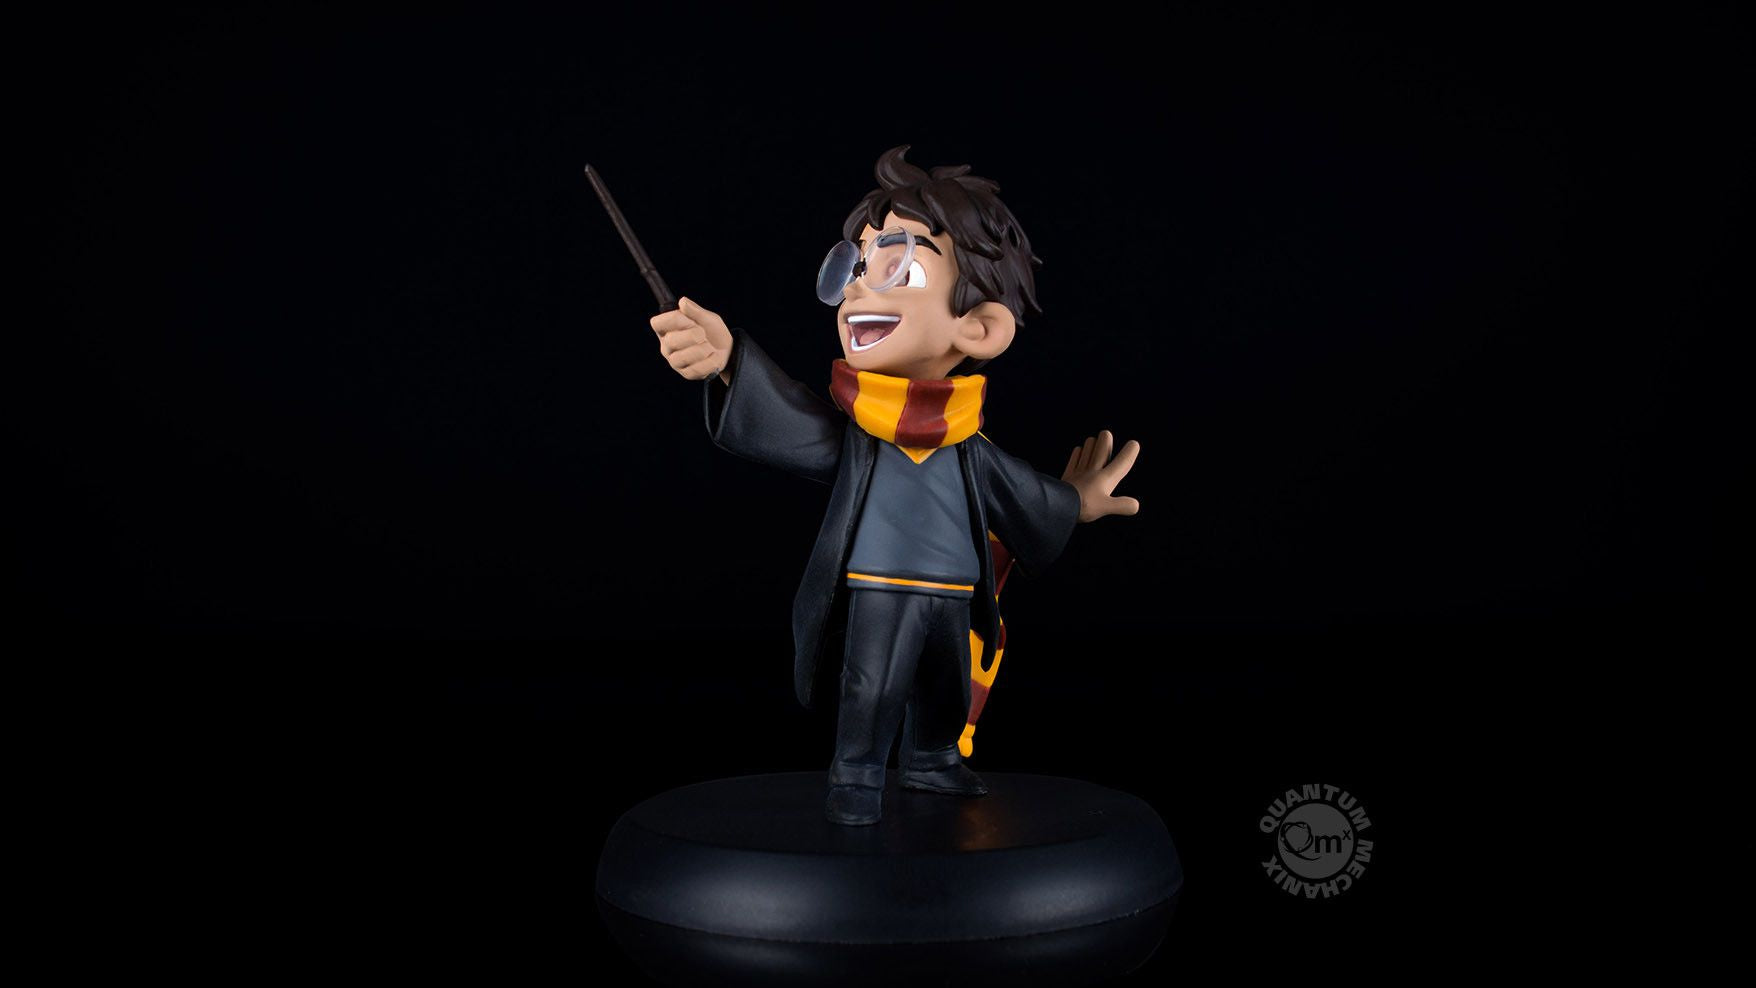 Harry Potter - Harry's First Spell Q-Fig Figure - Ozzie Collectables